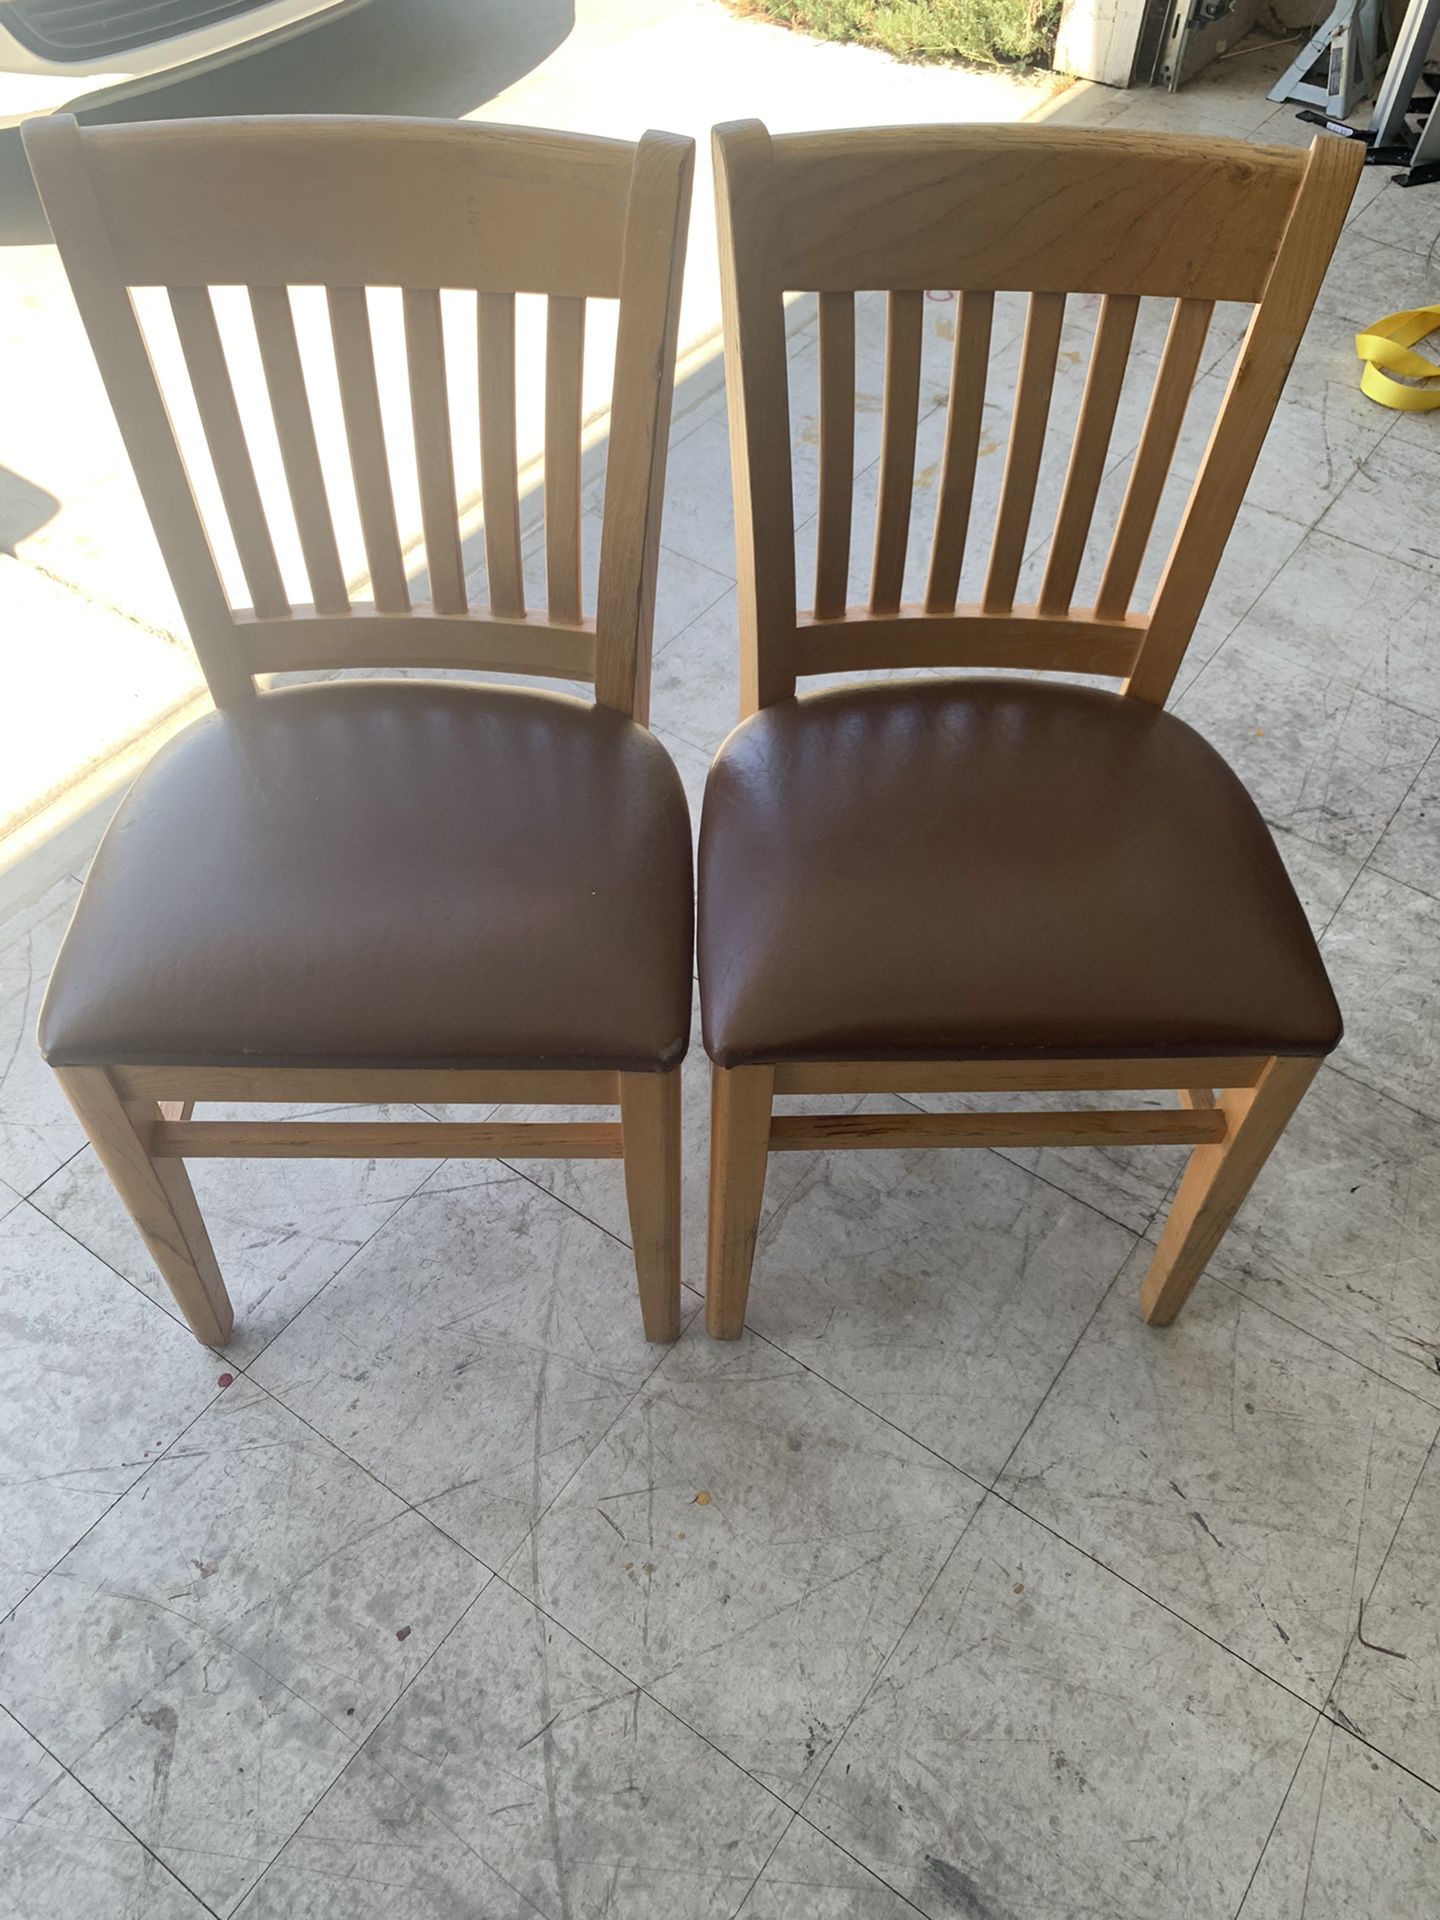 Chairs I have 10 of them sale separate or all together